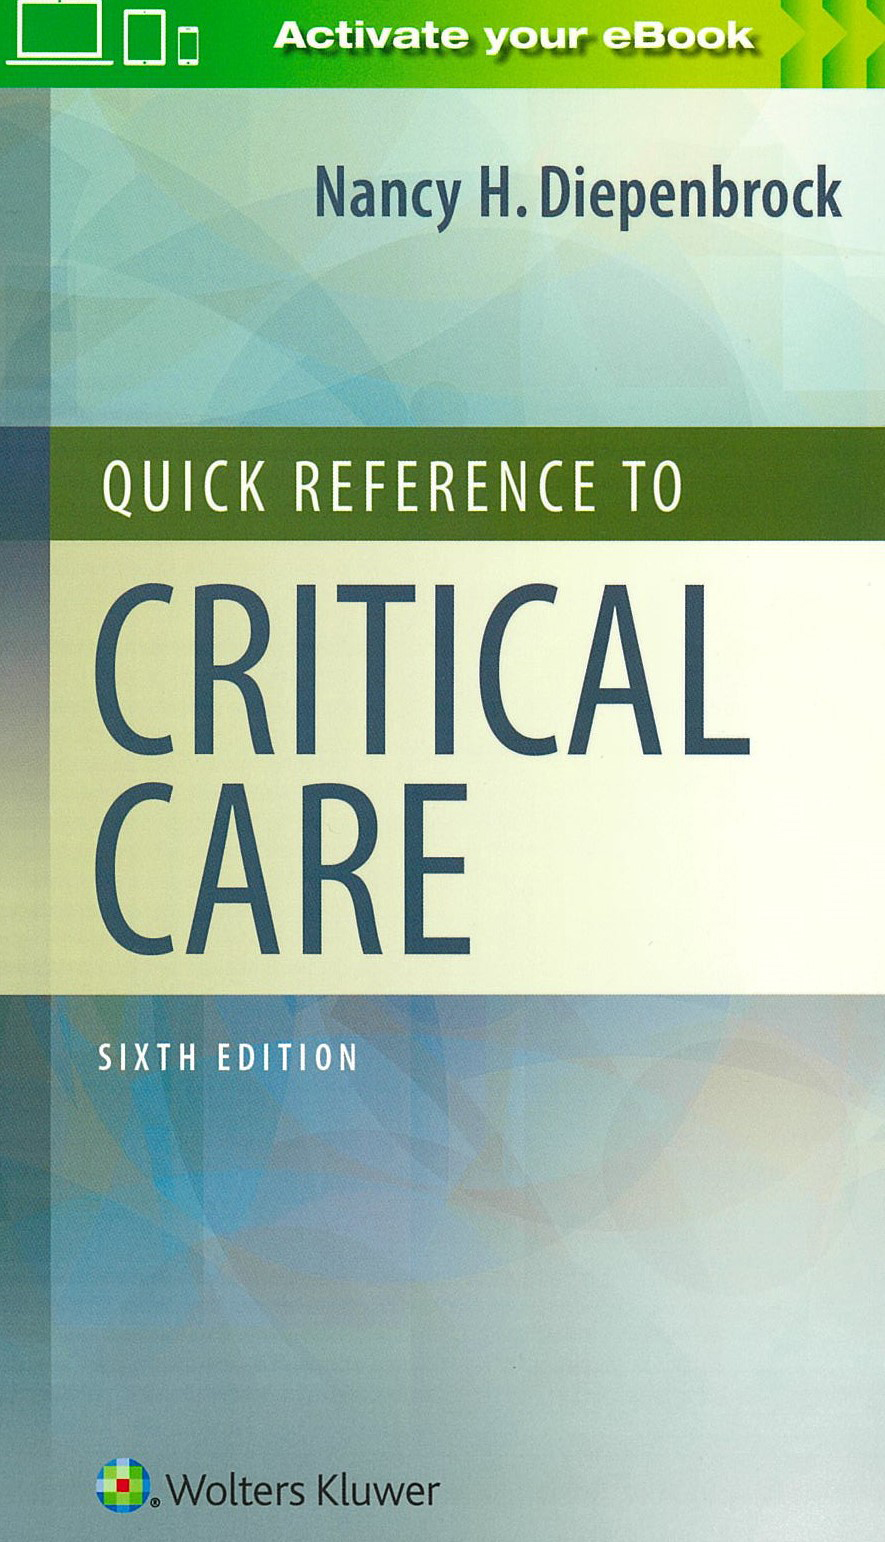 Quick Reference to Critical Care, 6th Ed.